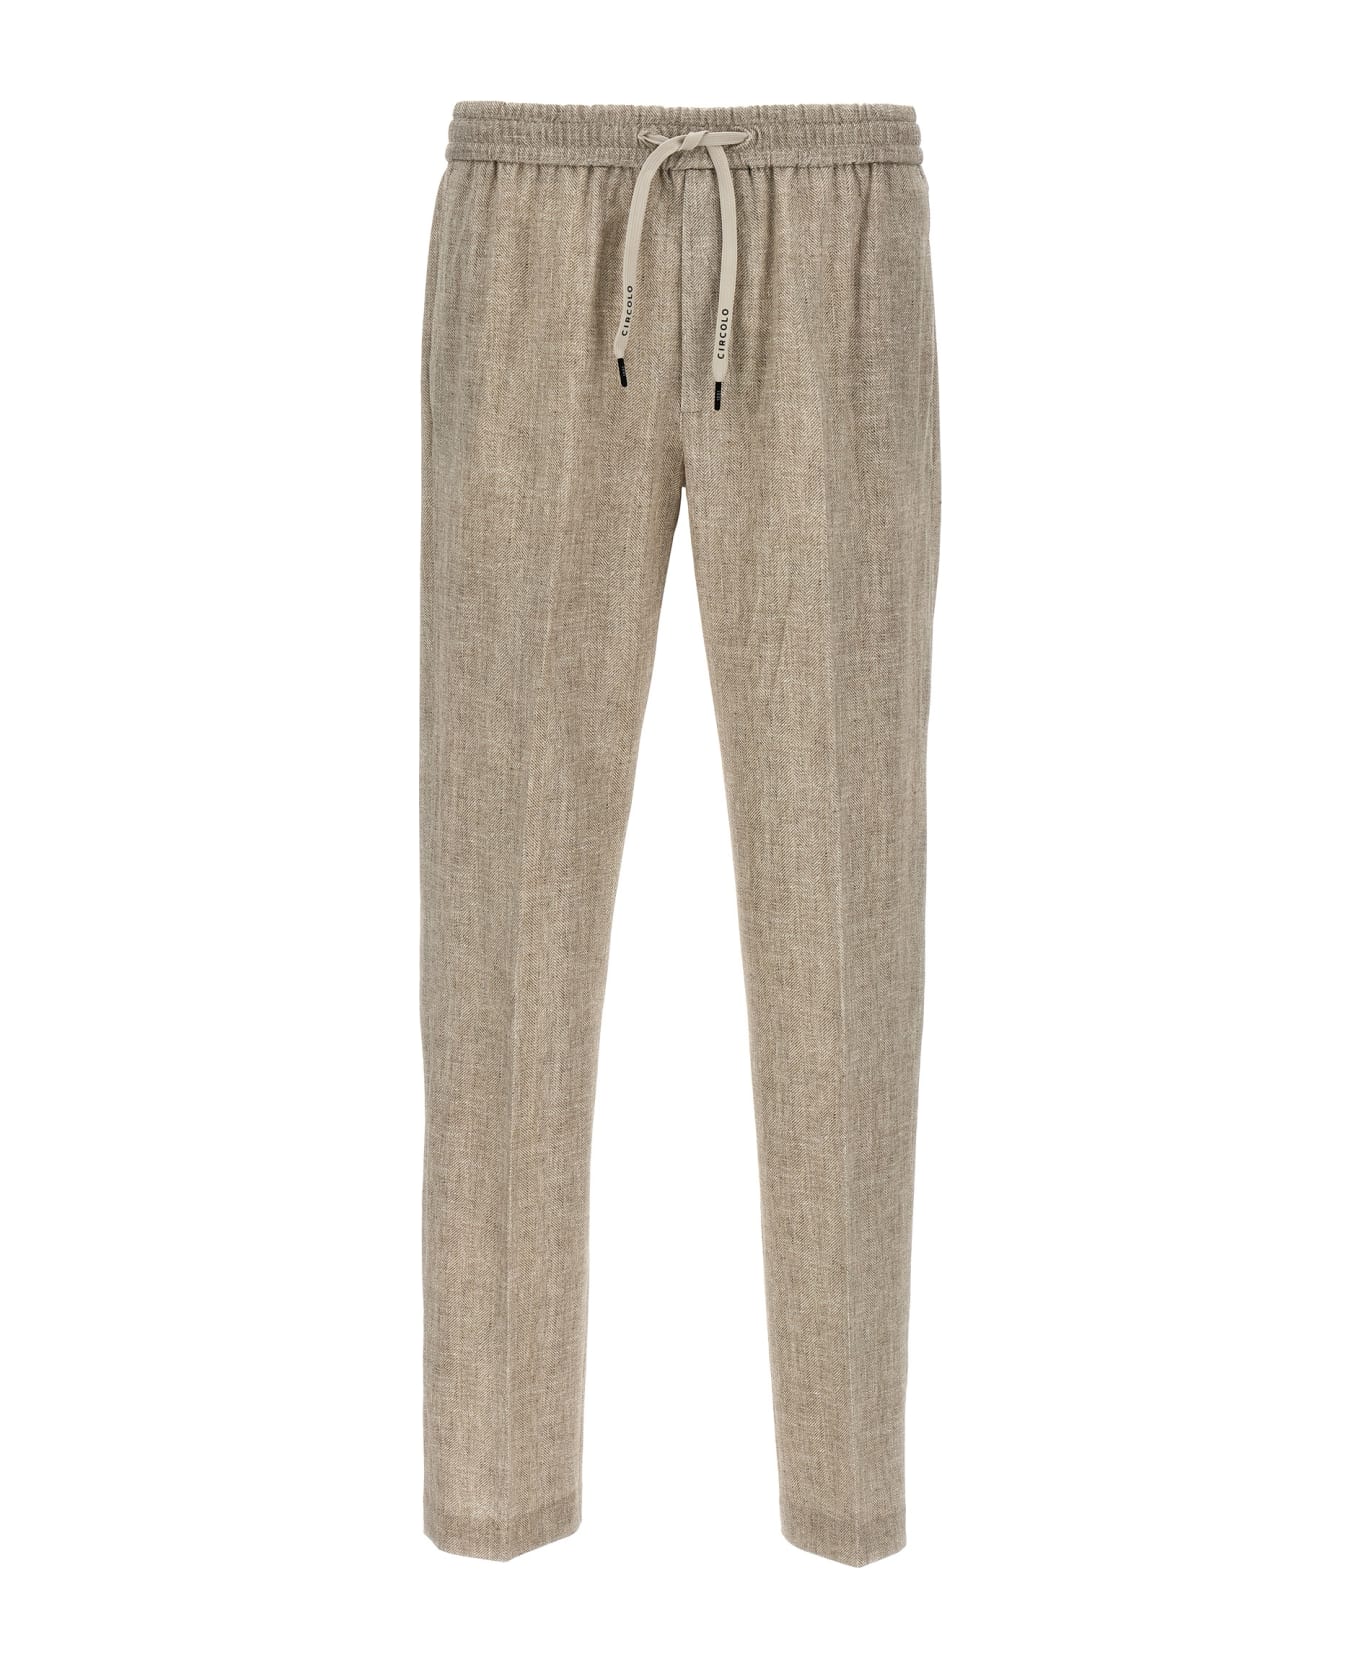 Circolo 1901 Barbed Pants - Beige